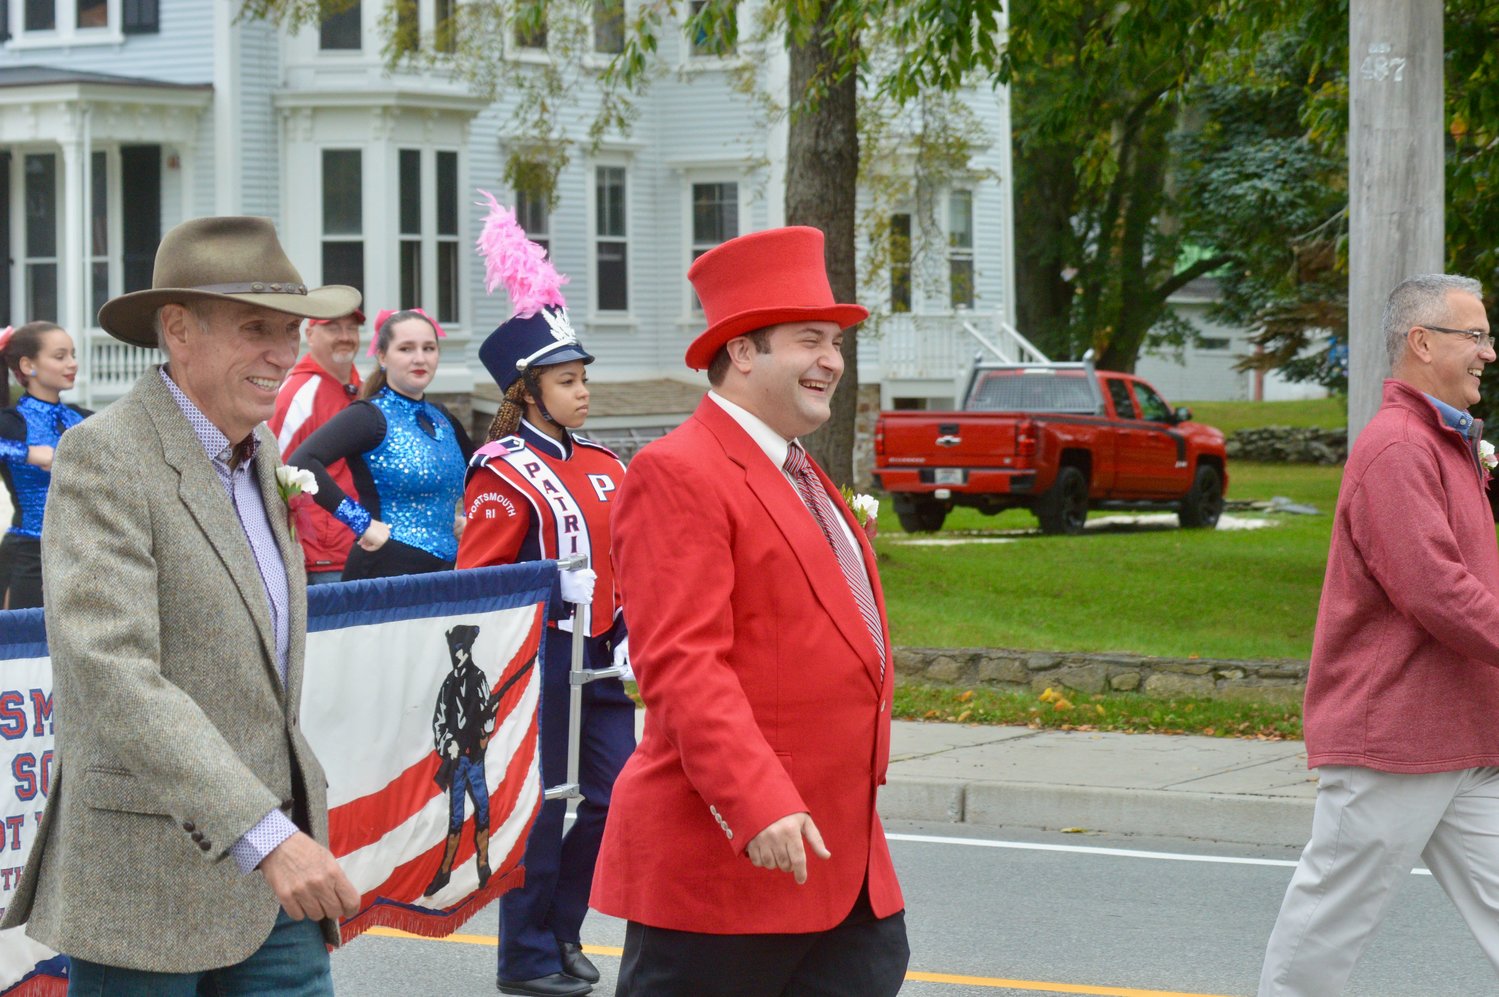 Tom Vadney of the School Committee and Andrew Kelly and Kevin Aguiar of the Town Council (from left), greet spectators during the parade.